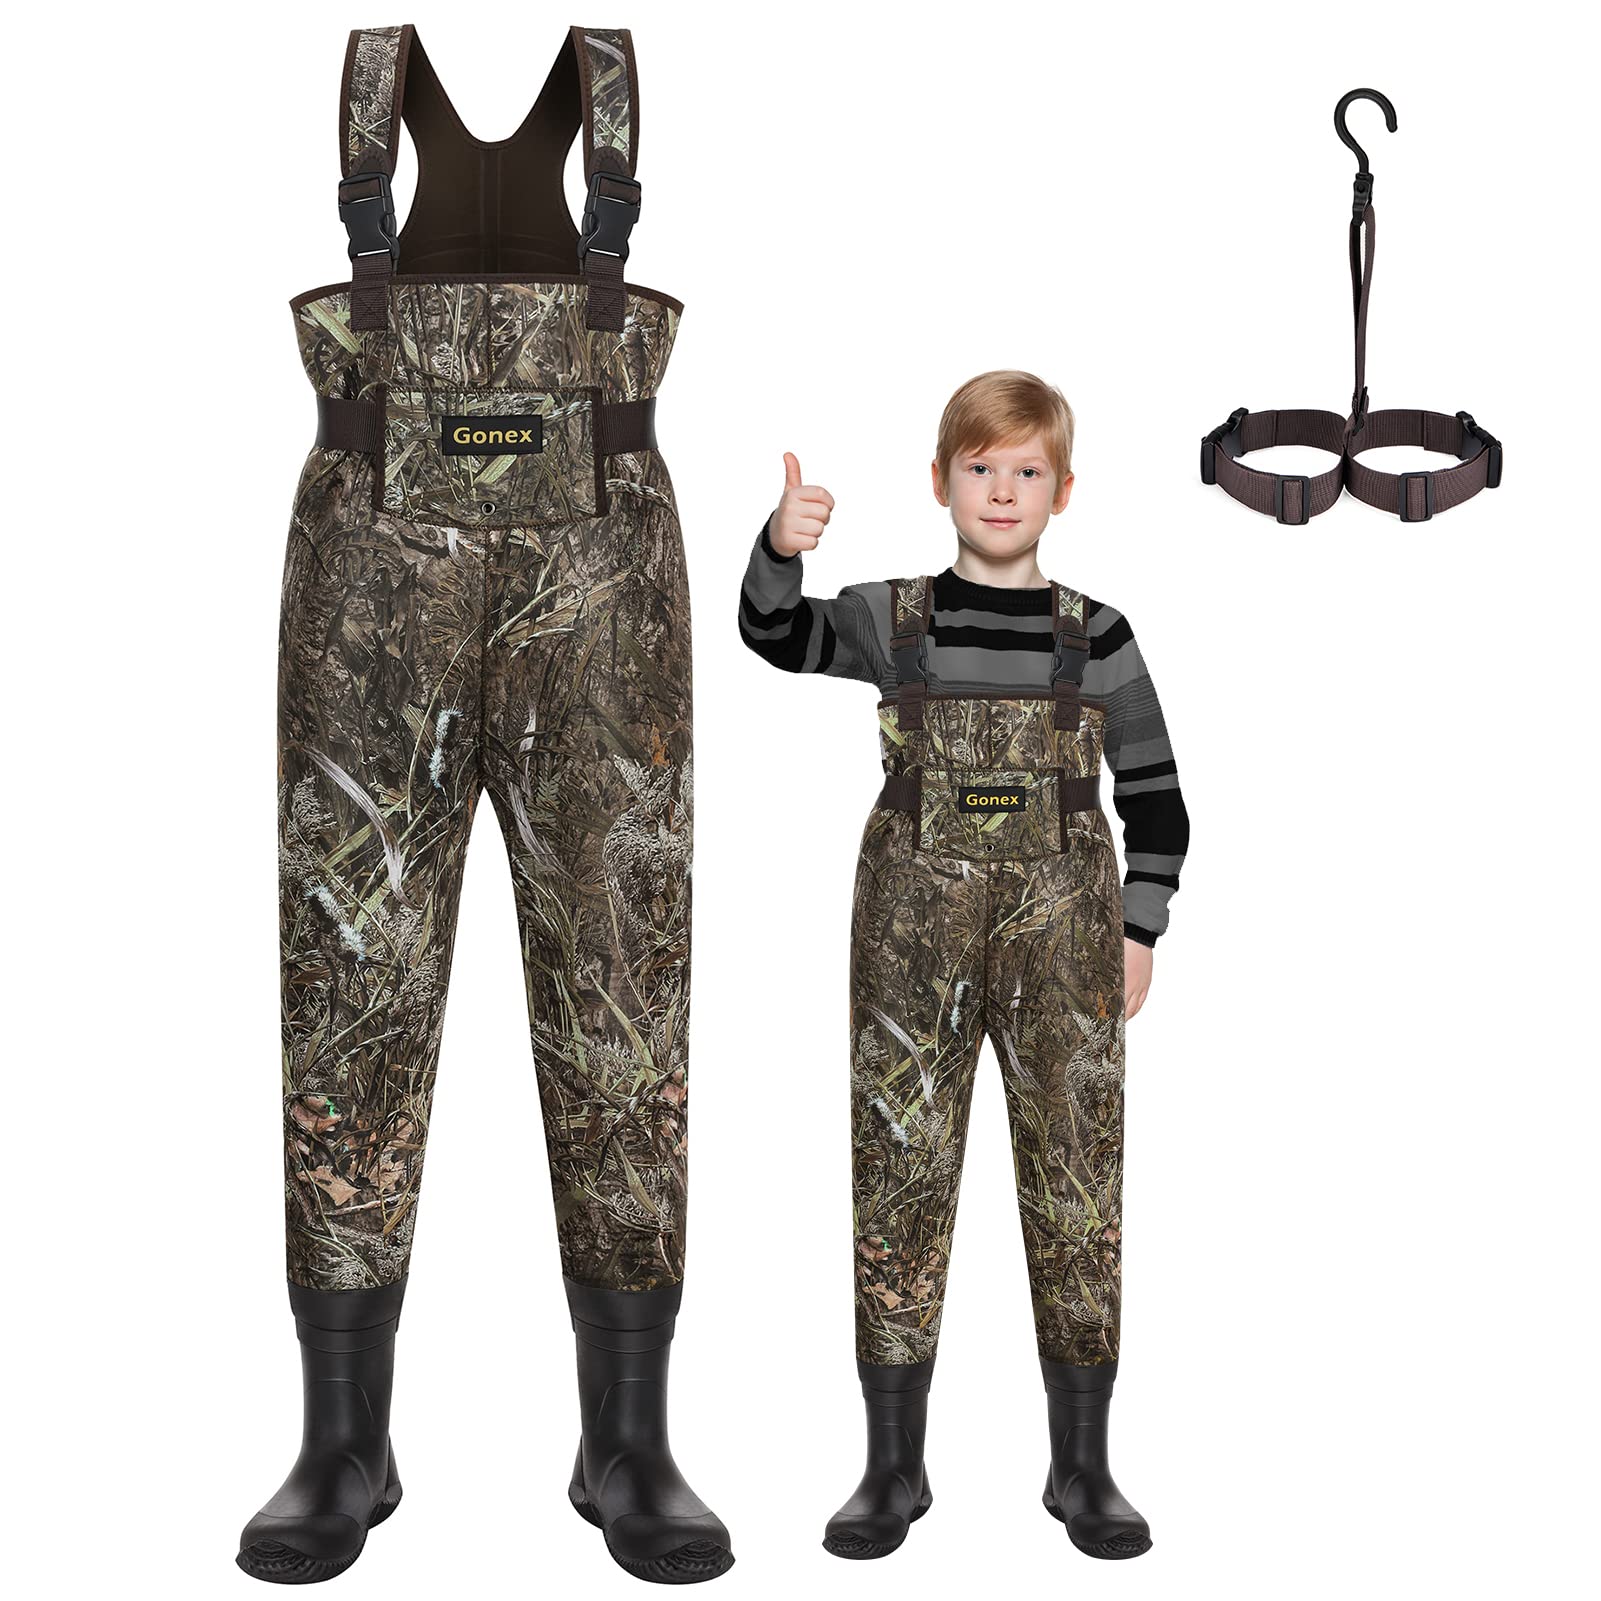 We're not sure what else to say about these Camo Waders 😅 They're